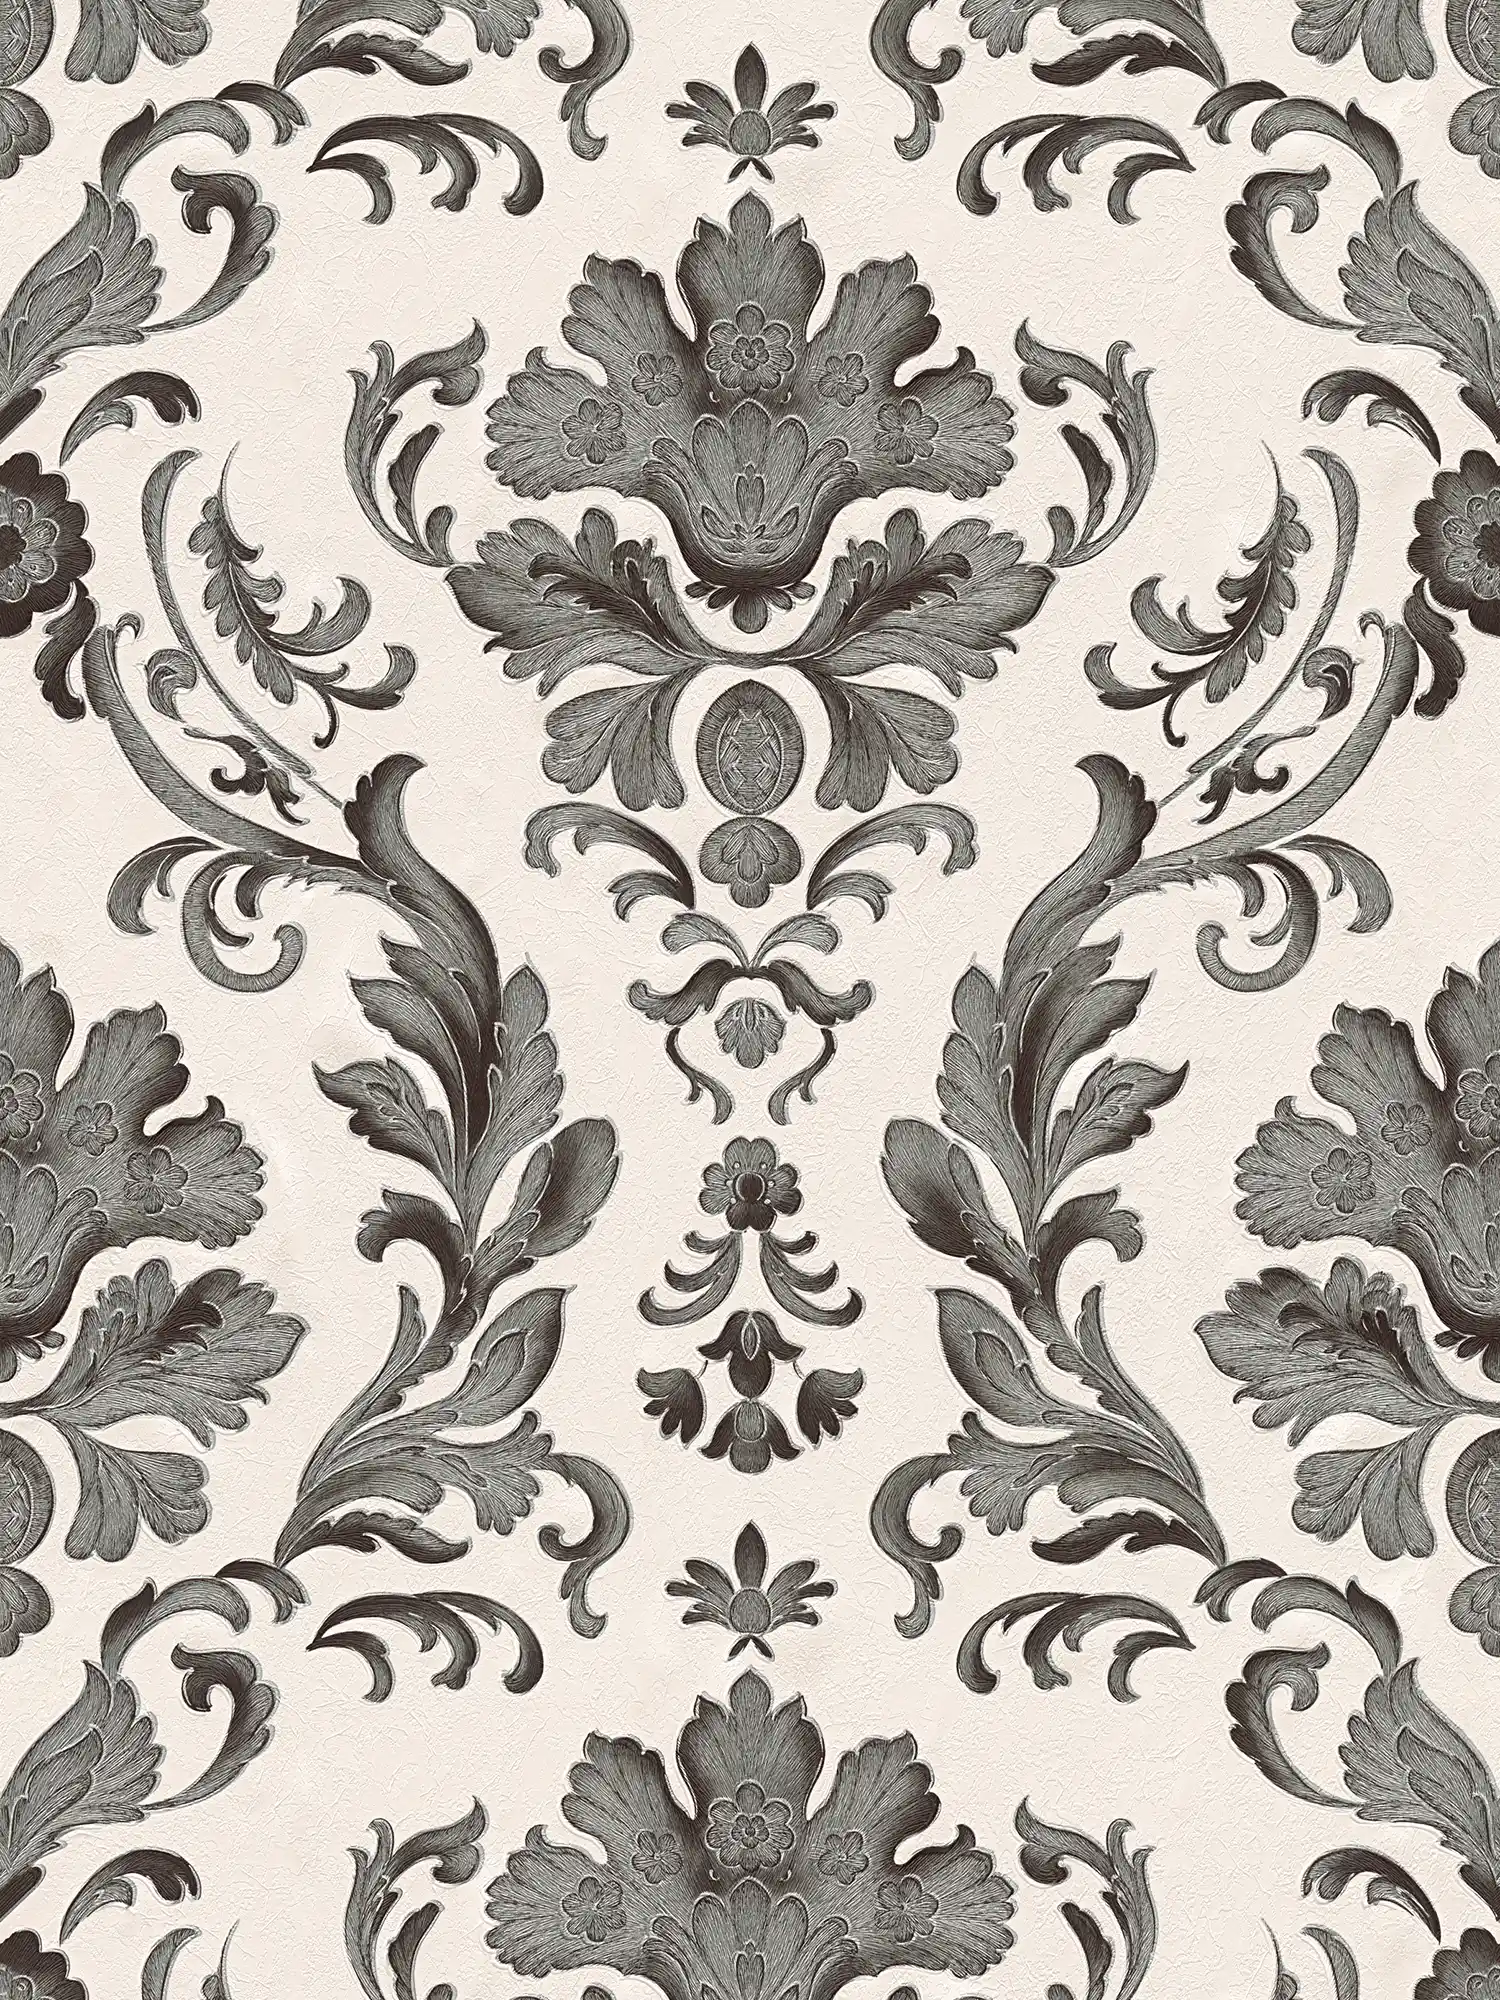 Wallpaper with detailed ornaments in floral style - black, white
